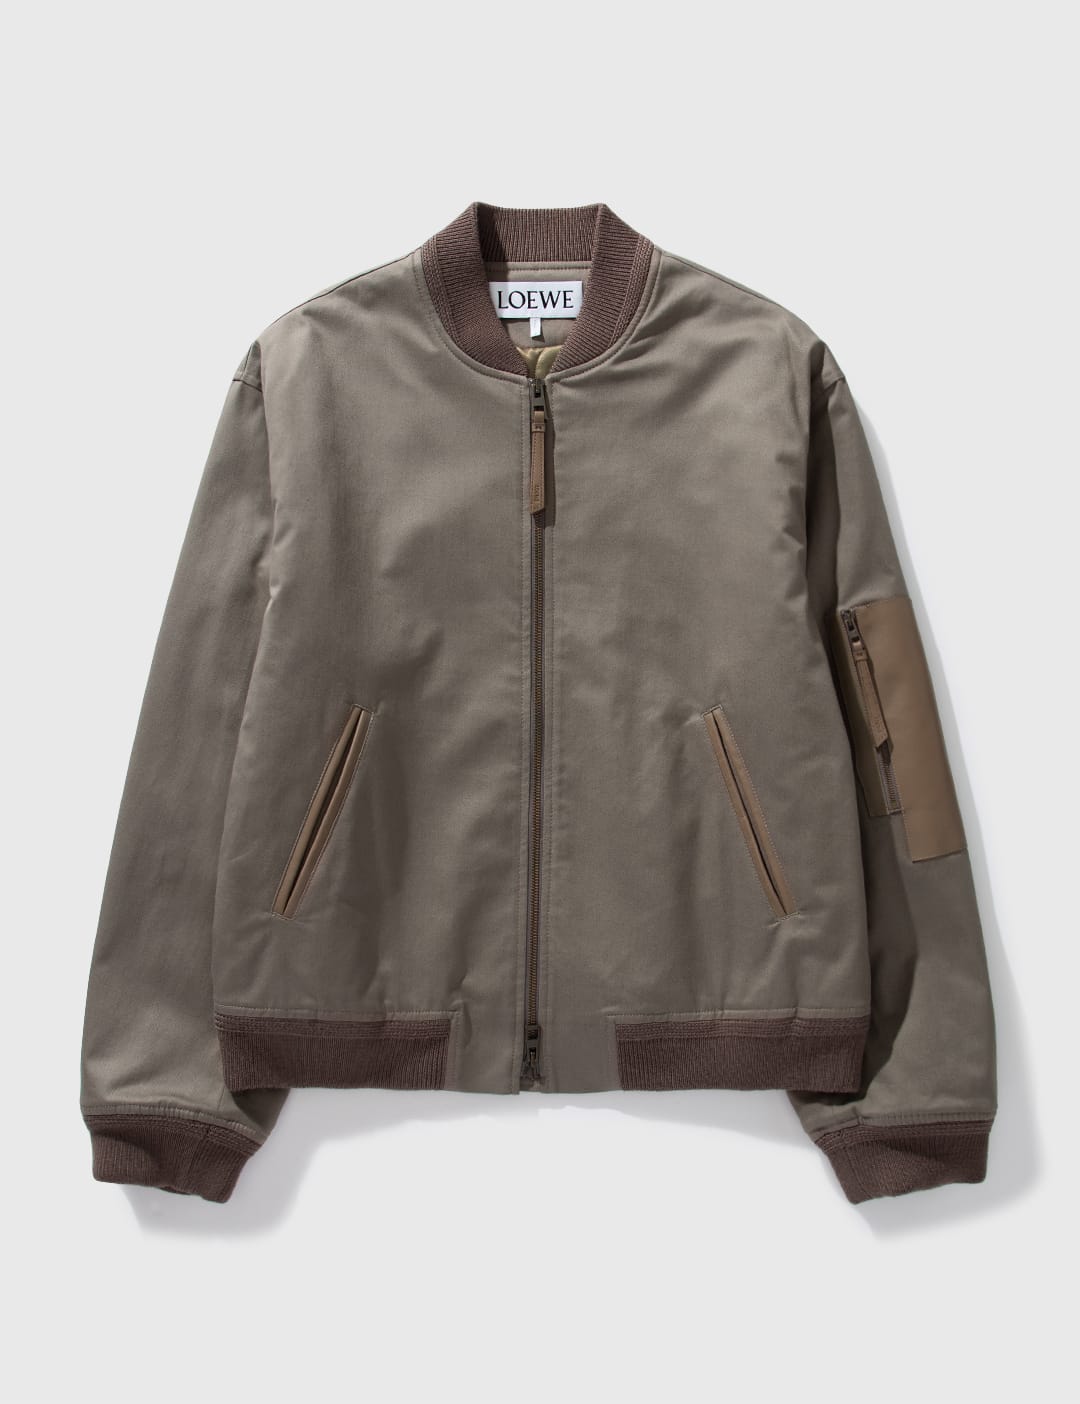 Loewe - Bomber Jacket | HBX - Globally Curated Fashion and 